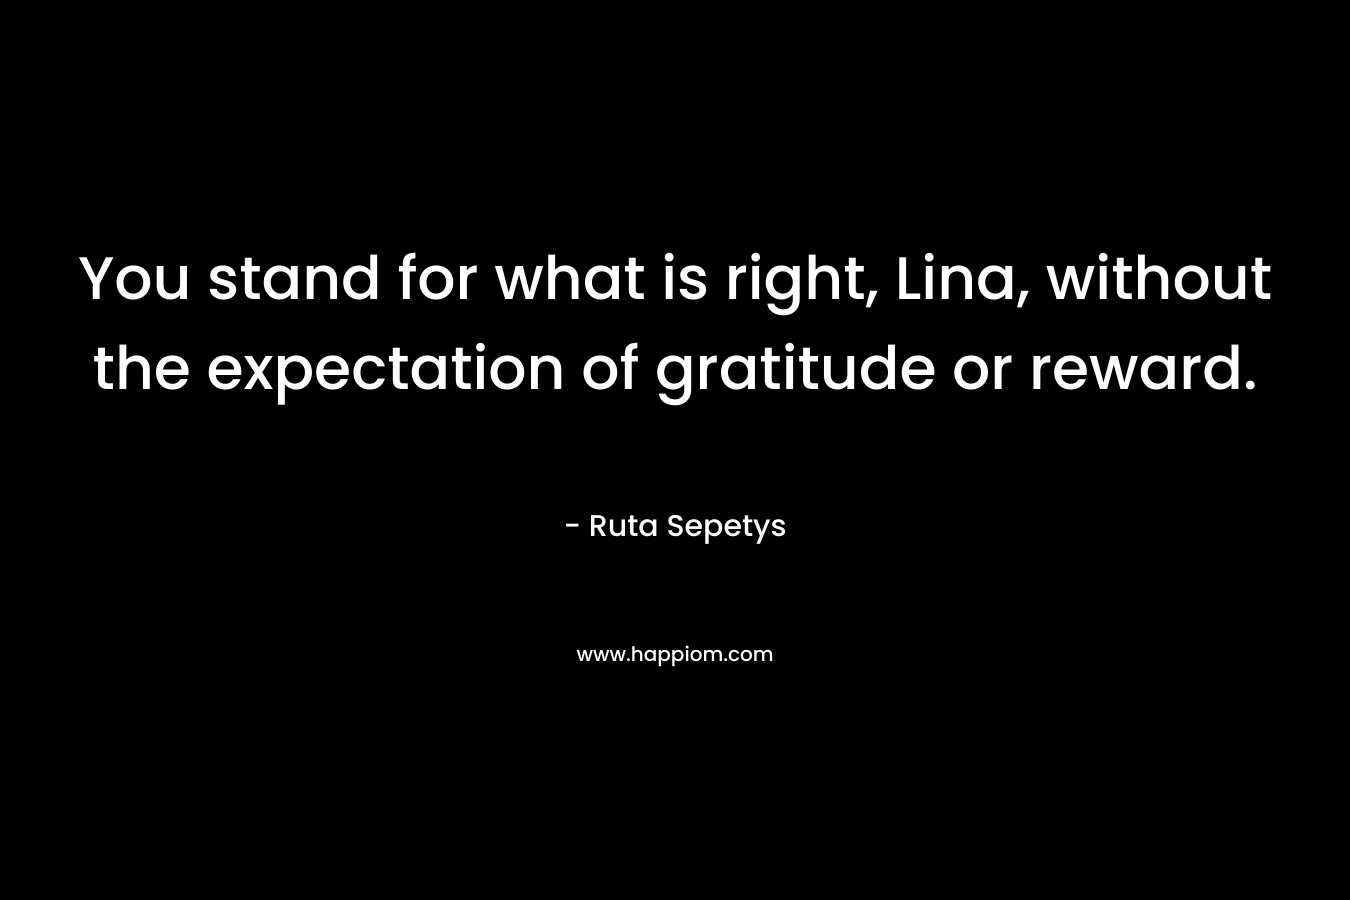 You stand for what is right, Lina, without the expectation of gratitude or reward.